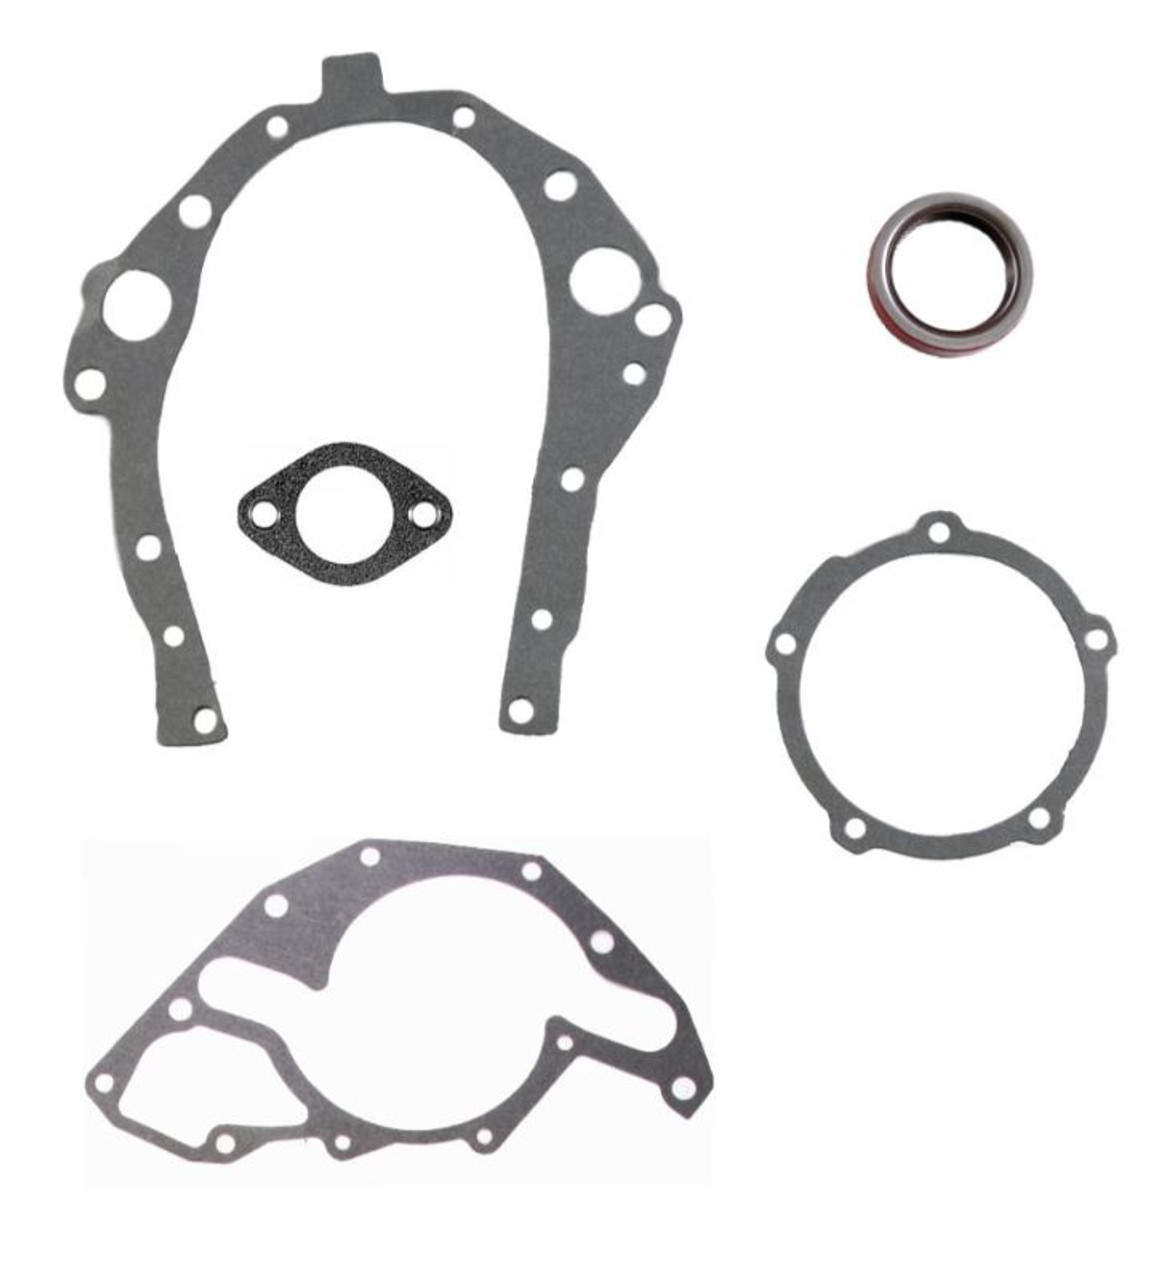 1994 Buick Century 3.1L Engine Timing Cover Gasket Set TCC189-A -114